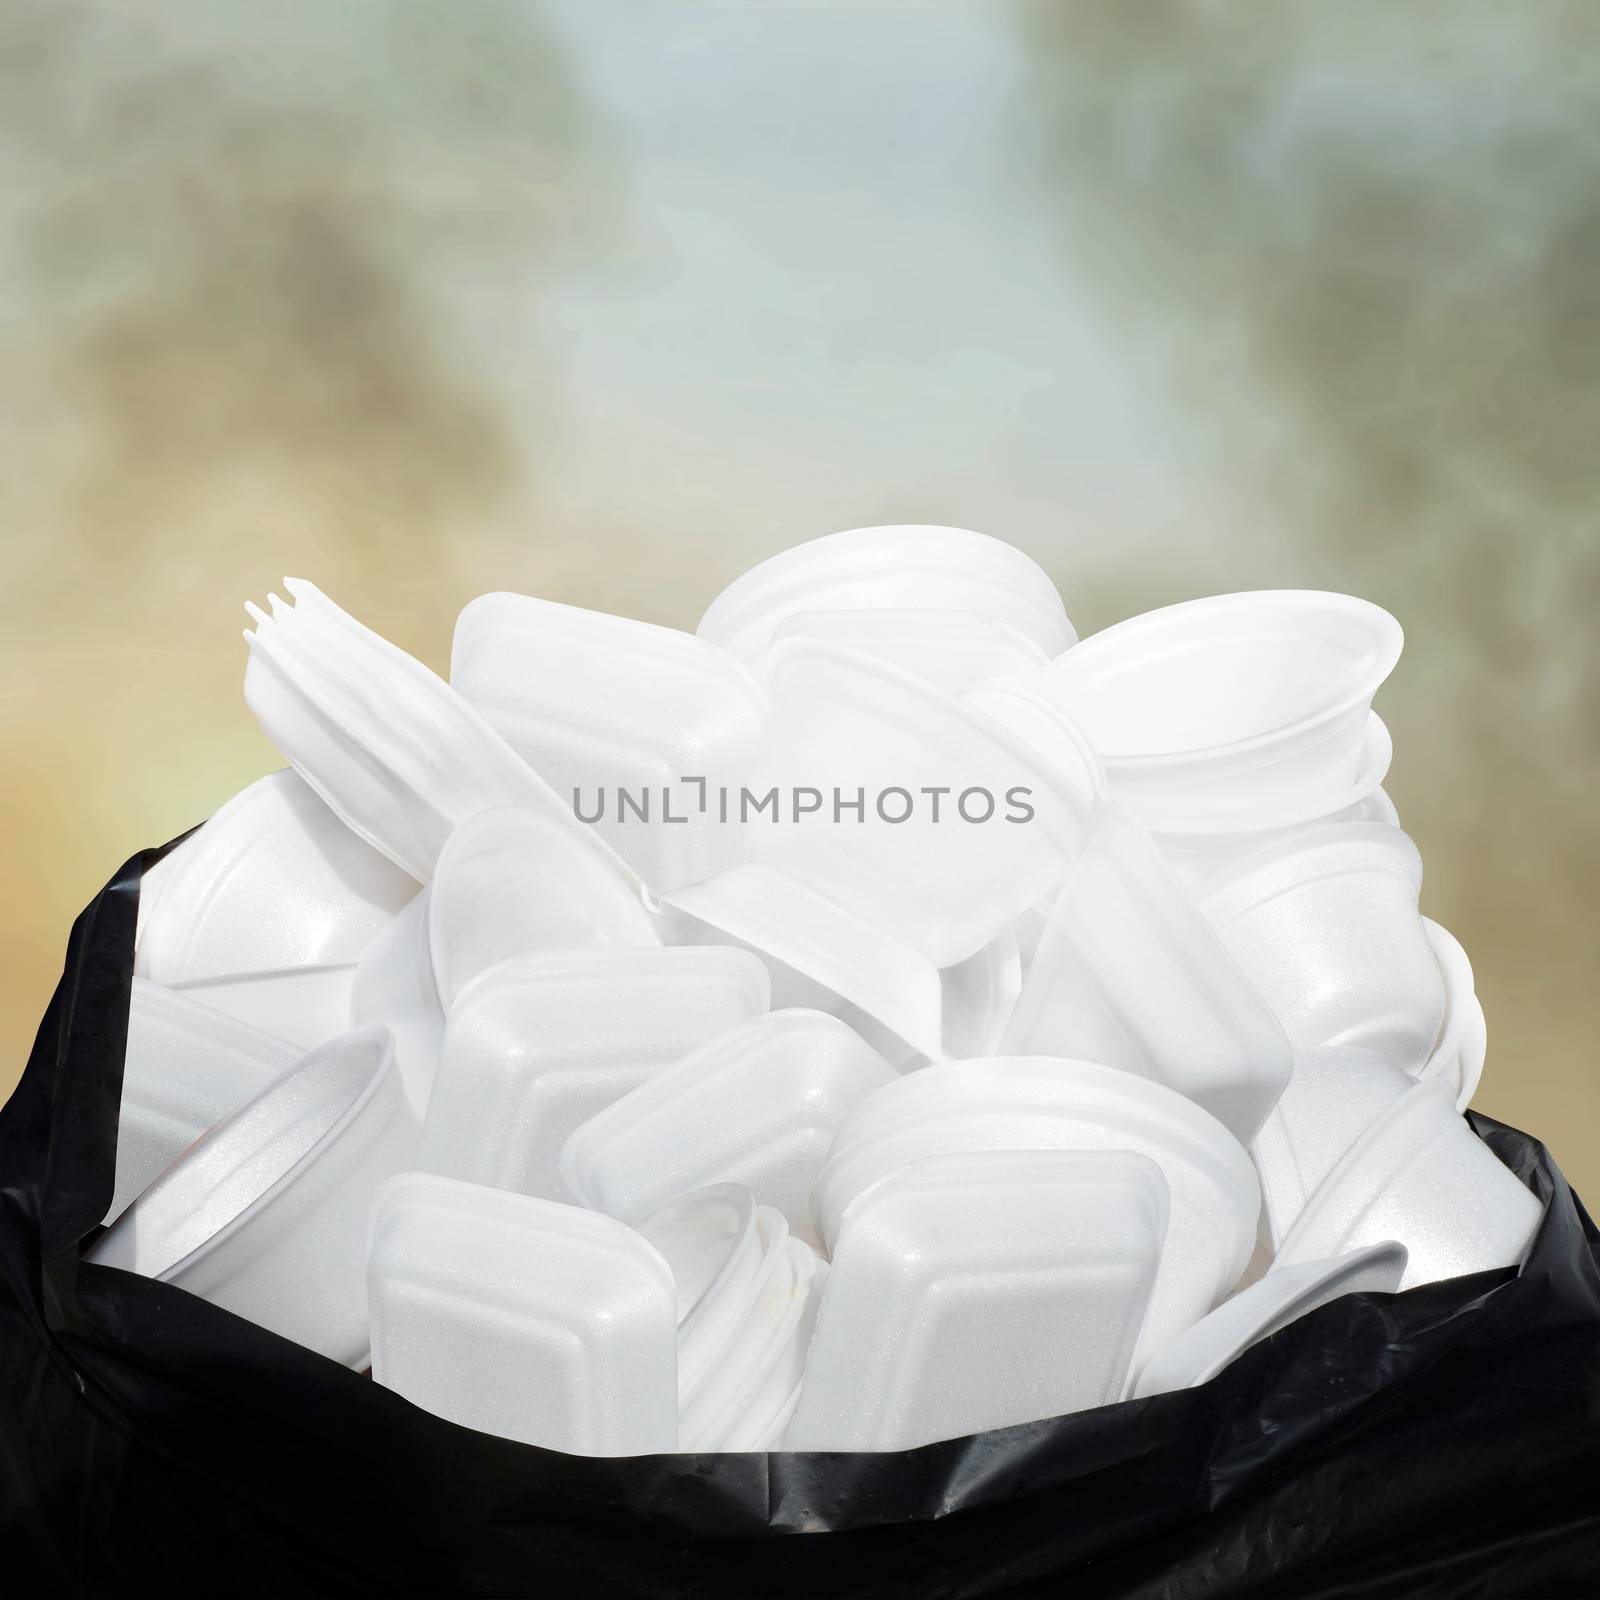 Waste Garbage foam food tray white many pile on the plastic black bag dirty on sky cloud air atmosphere pollution background